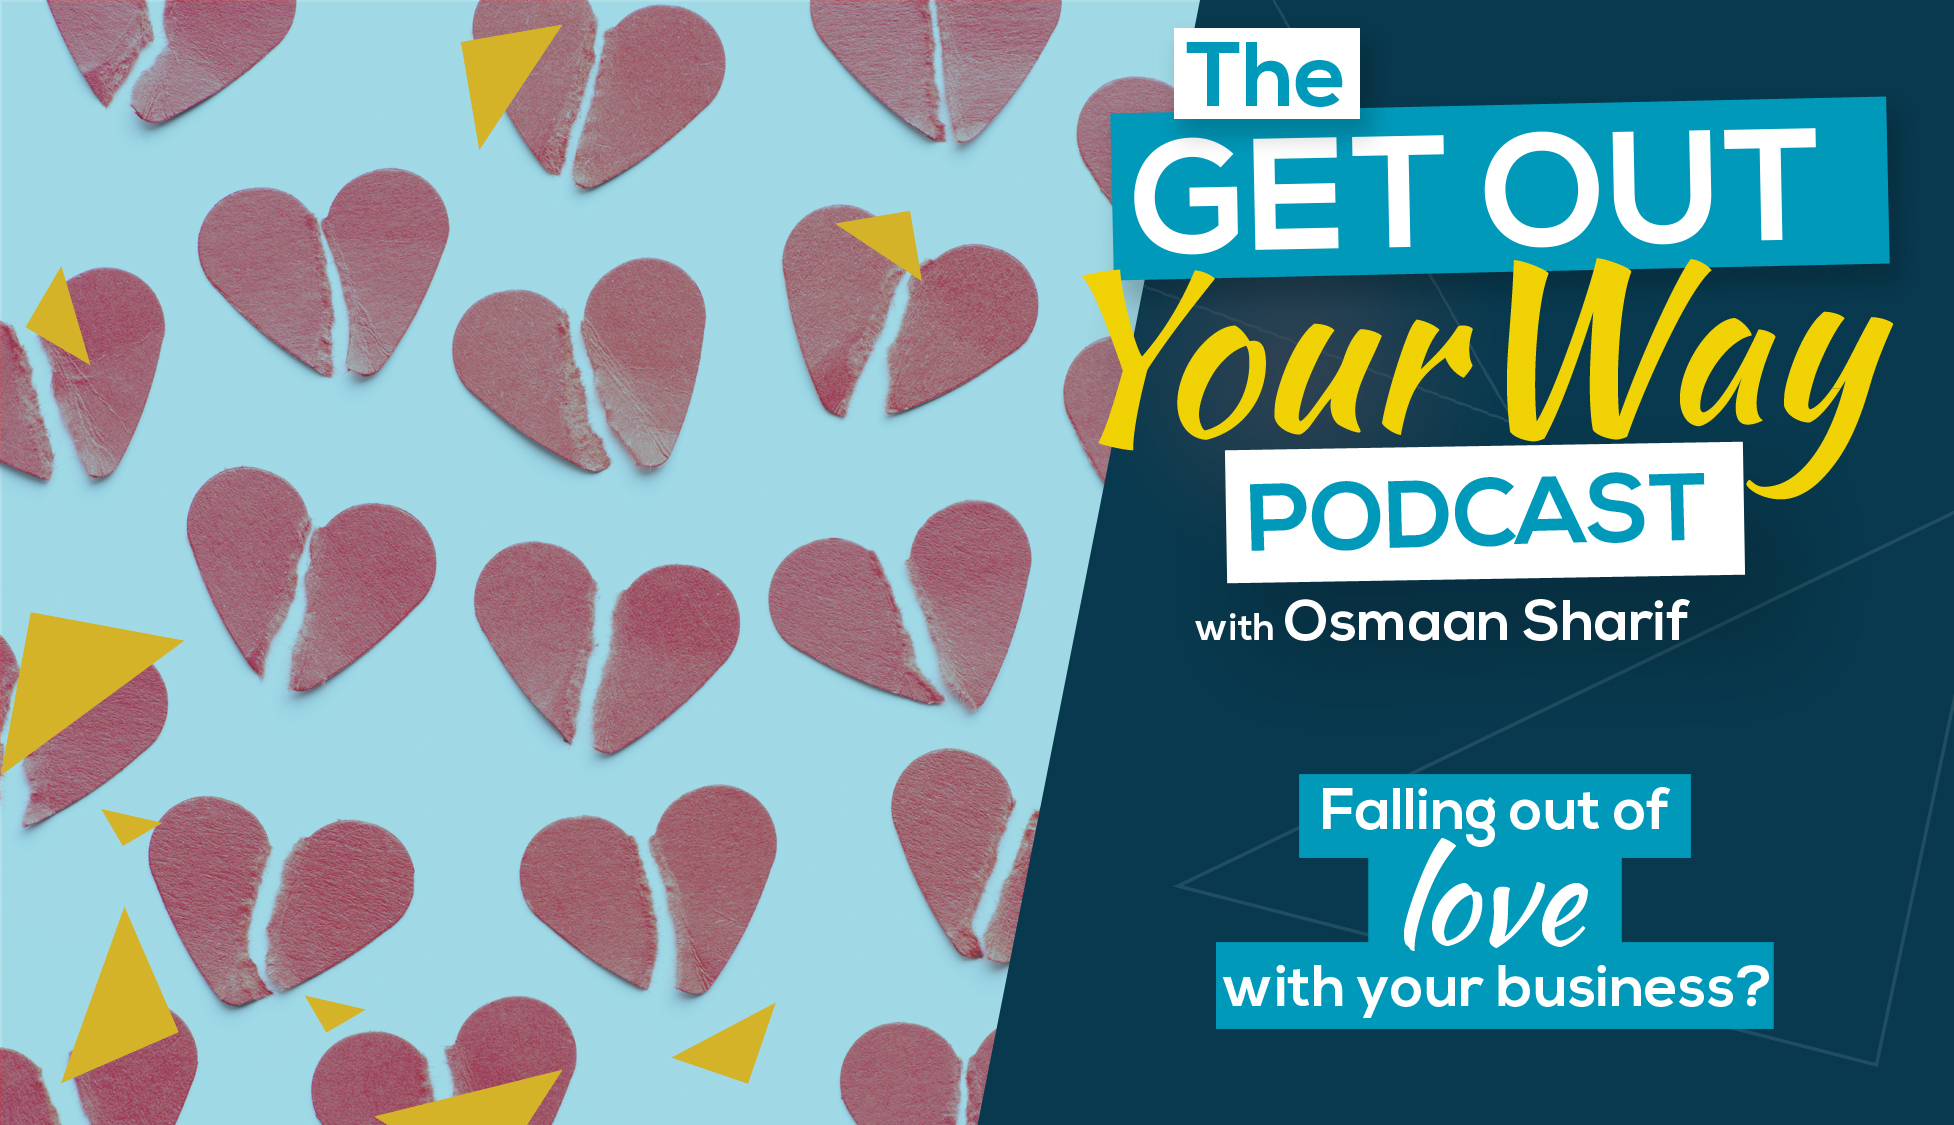 Falling out of love with your business?